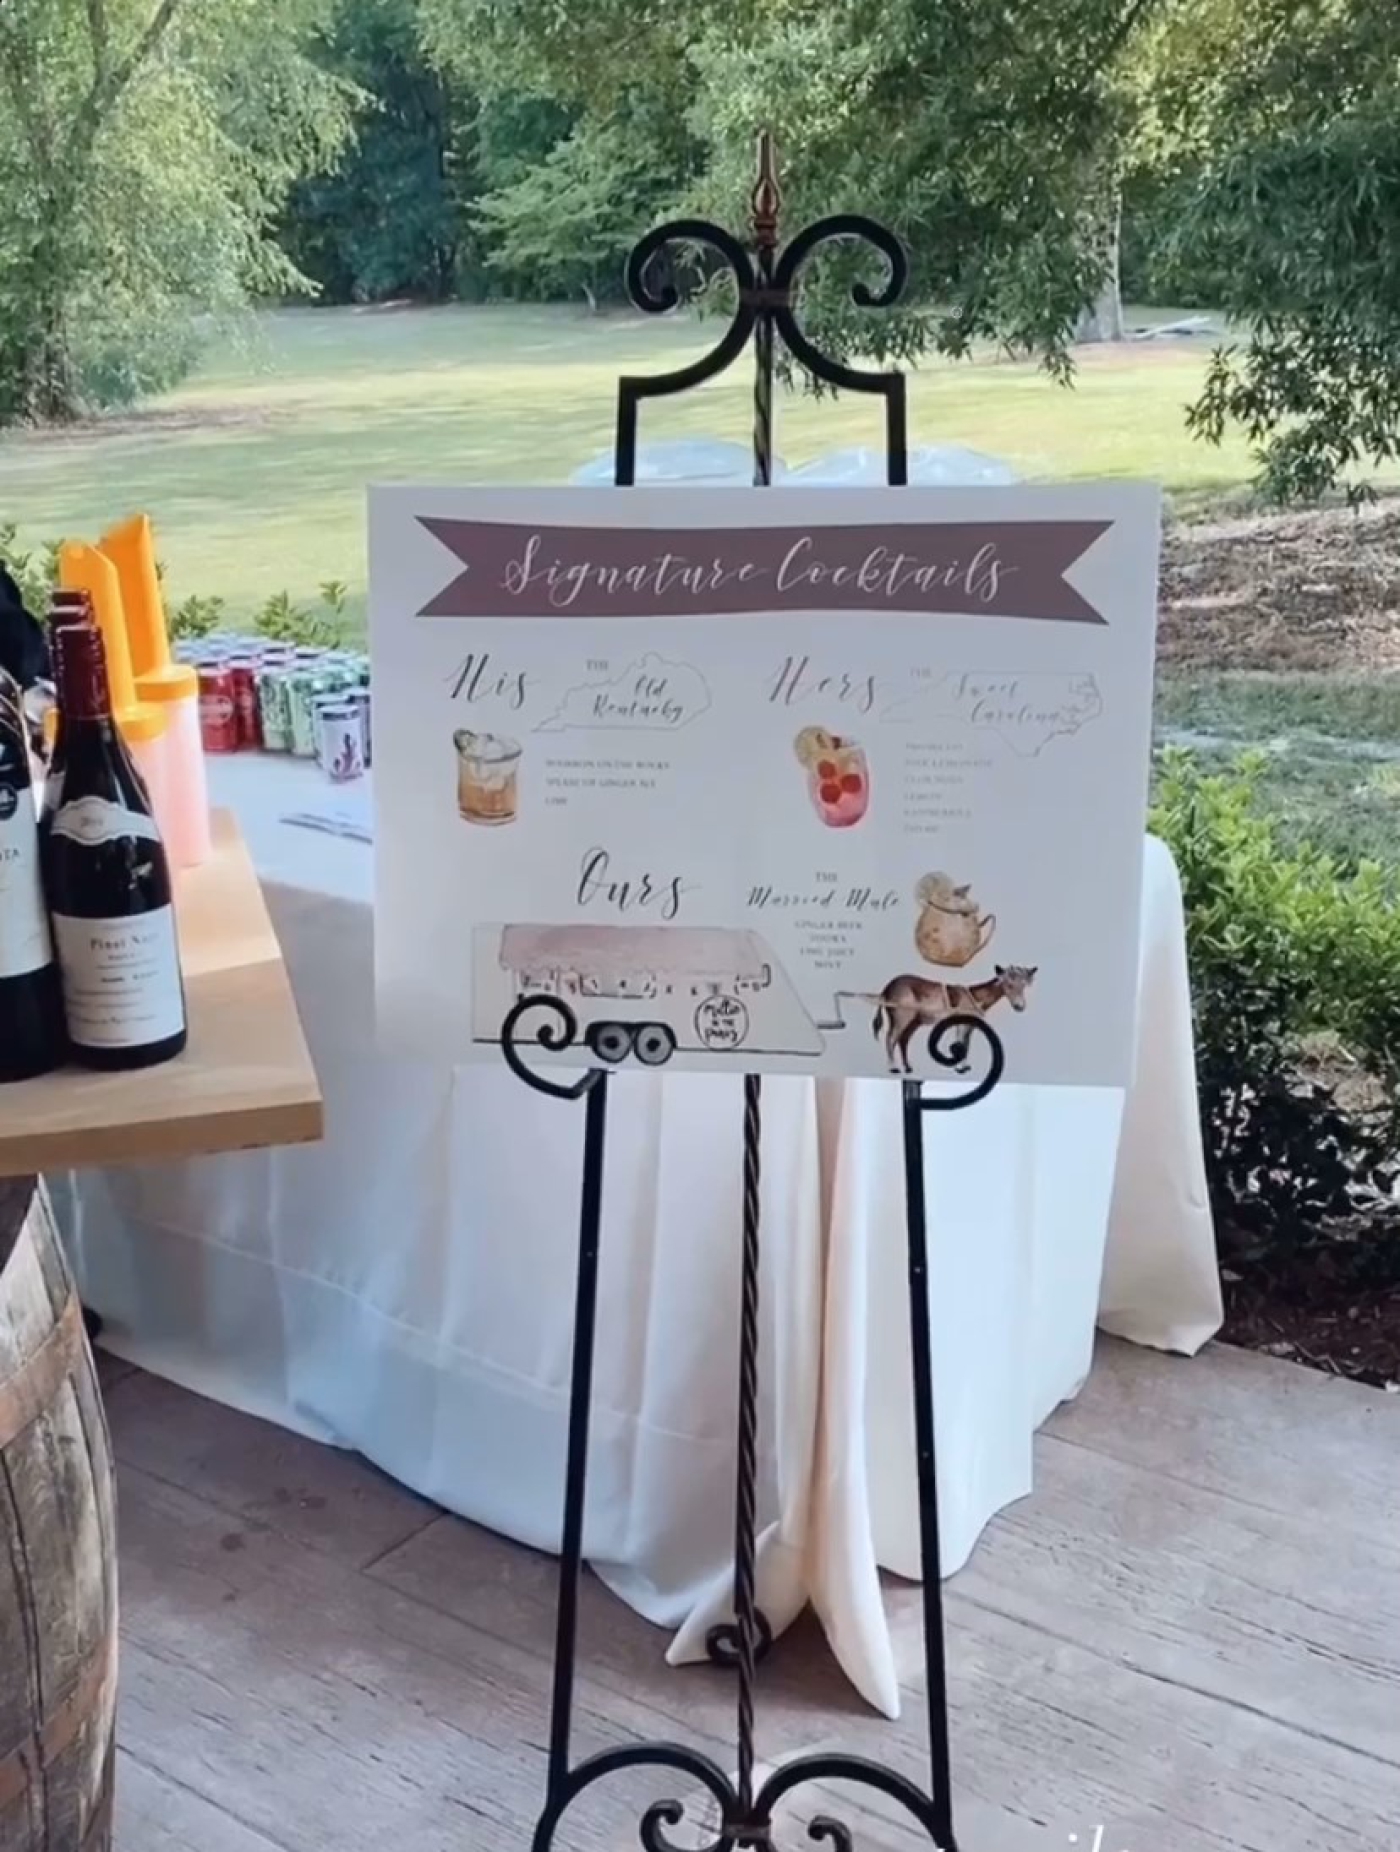 Hand-painted signature cocktail signage